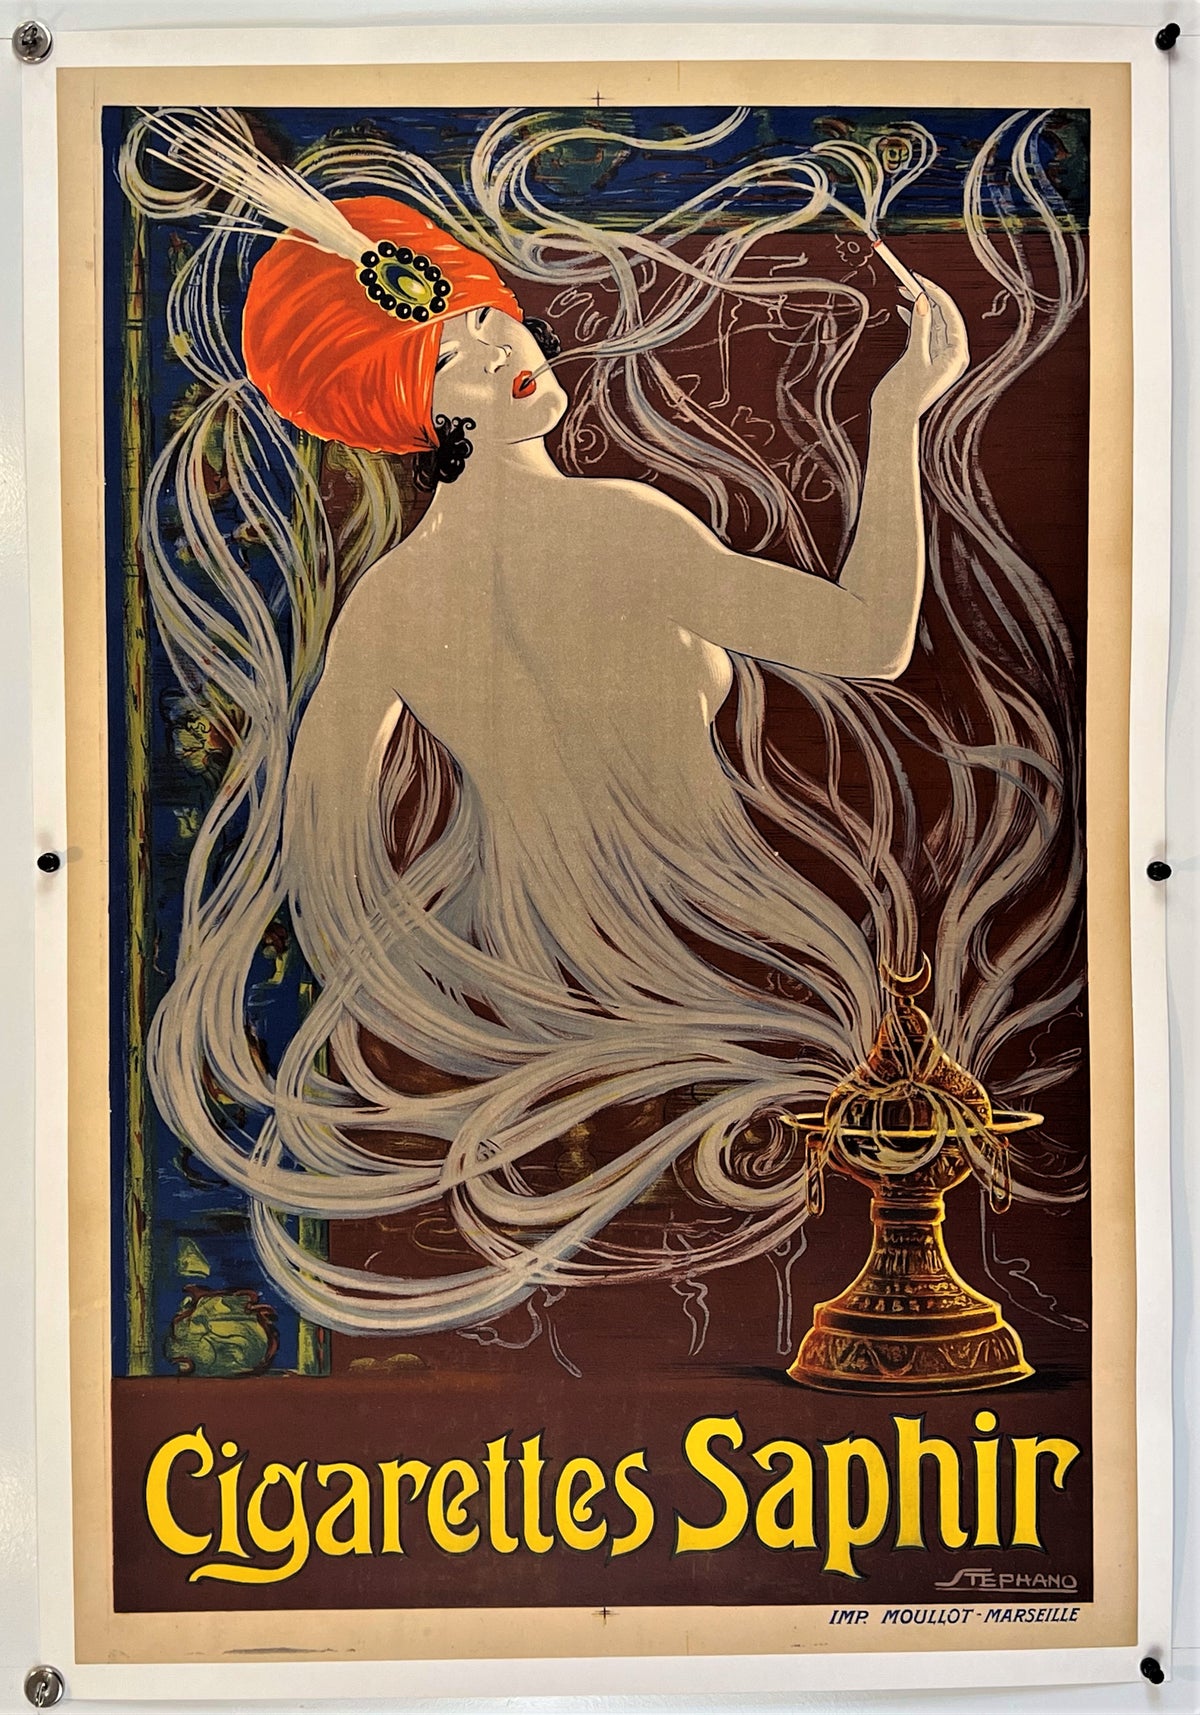 Cigarettes Saphir by Stephano - Authentic Vintage Poster